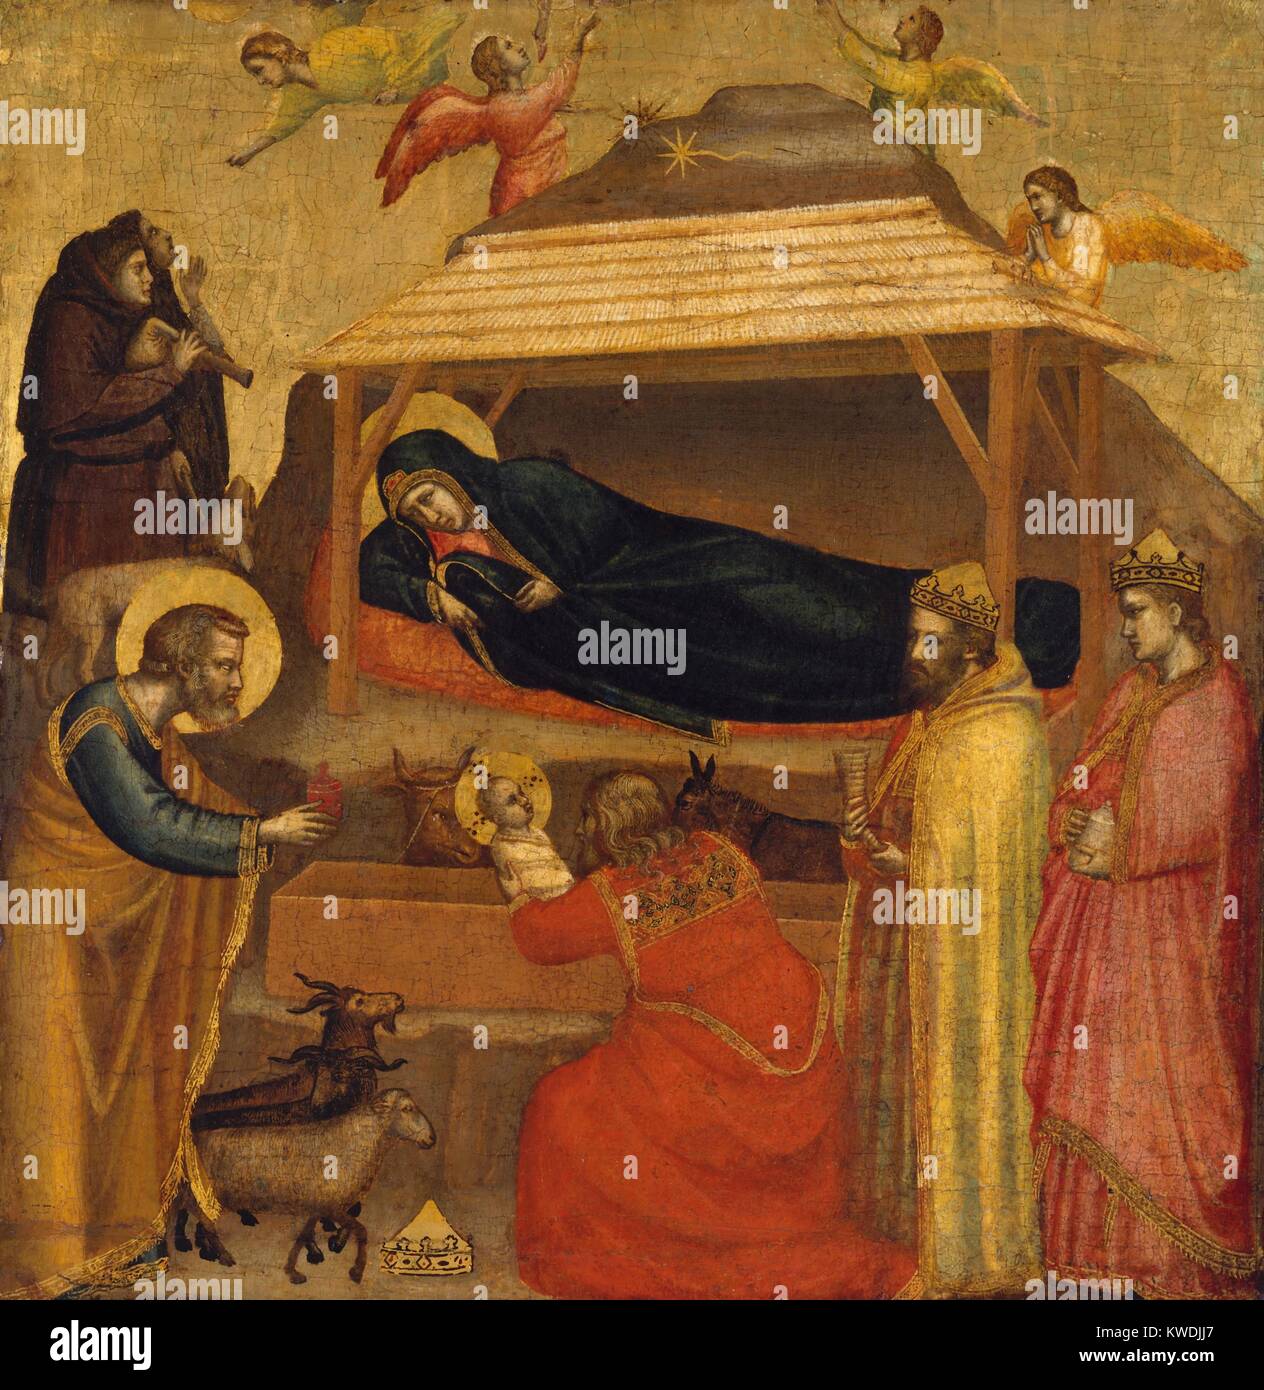 THE ADORATION OF THE MAGI, by Giotto, 1320, Italian Proto-Renaissance painting, tempera on wood. After the birth of Jesus, the Bible described in Matthew 2:11, three Kings made a pilgrimage to Jesus by following a star, bringing him gifts of gold, frankincense, and myrrh, and worshiping him. Giottos added the action of one Magi holding Jesus, a human moment in keeping with his with a greater realism (BSLOC 2017 16 46) Stock Photo